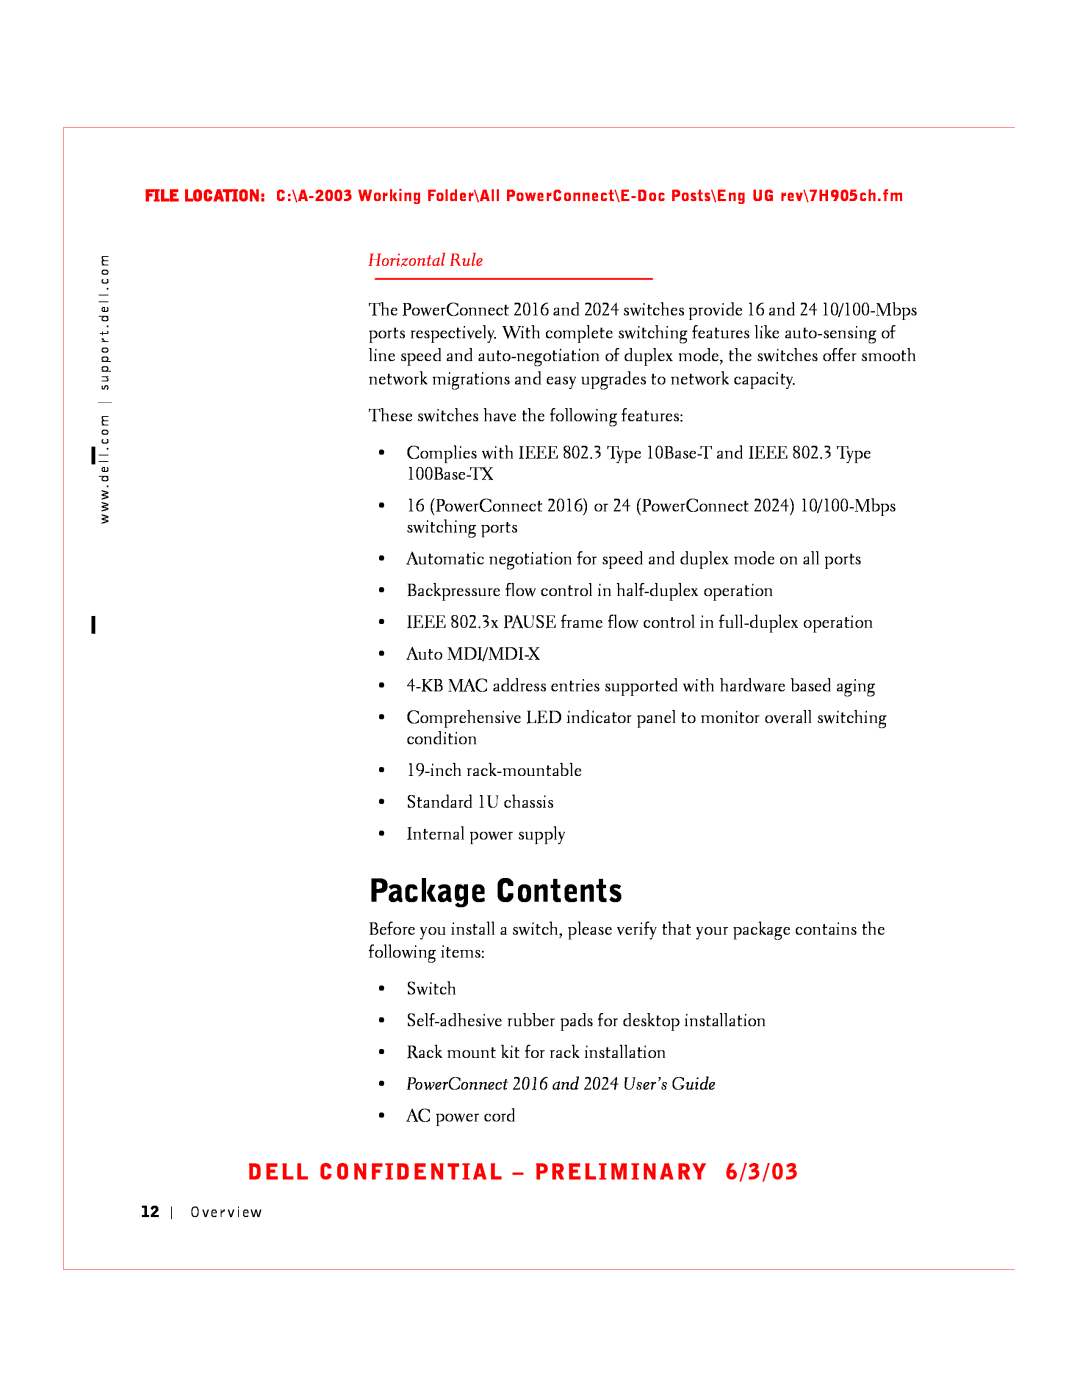 Dell 2016, 2024 manual Package Contents, DELL CONFIDENTIAL - PRELIMINARY 6/3/03, Horizontal Rule 